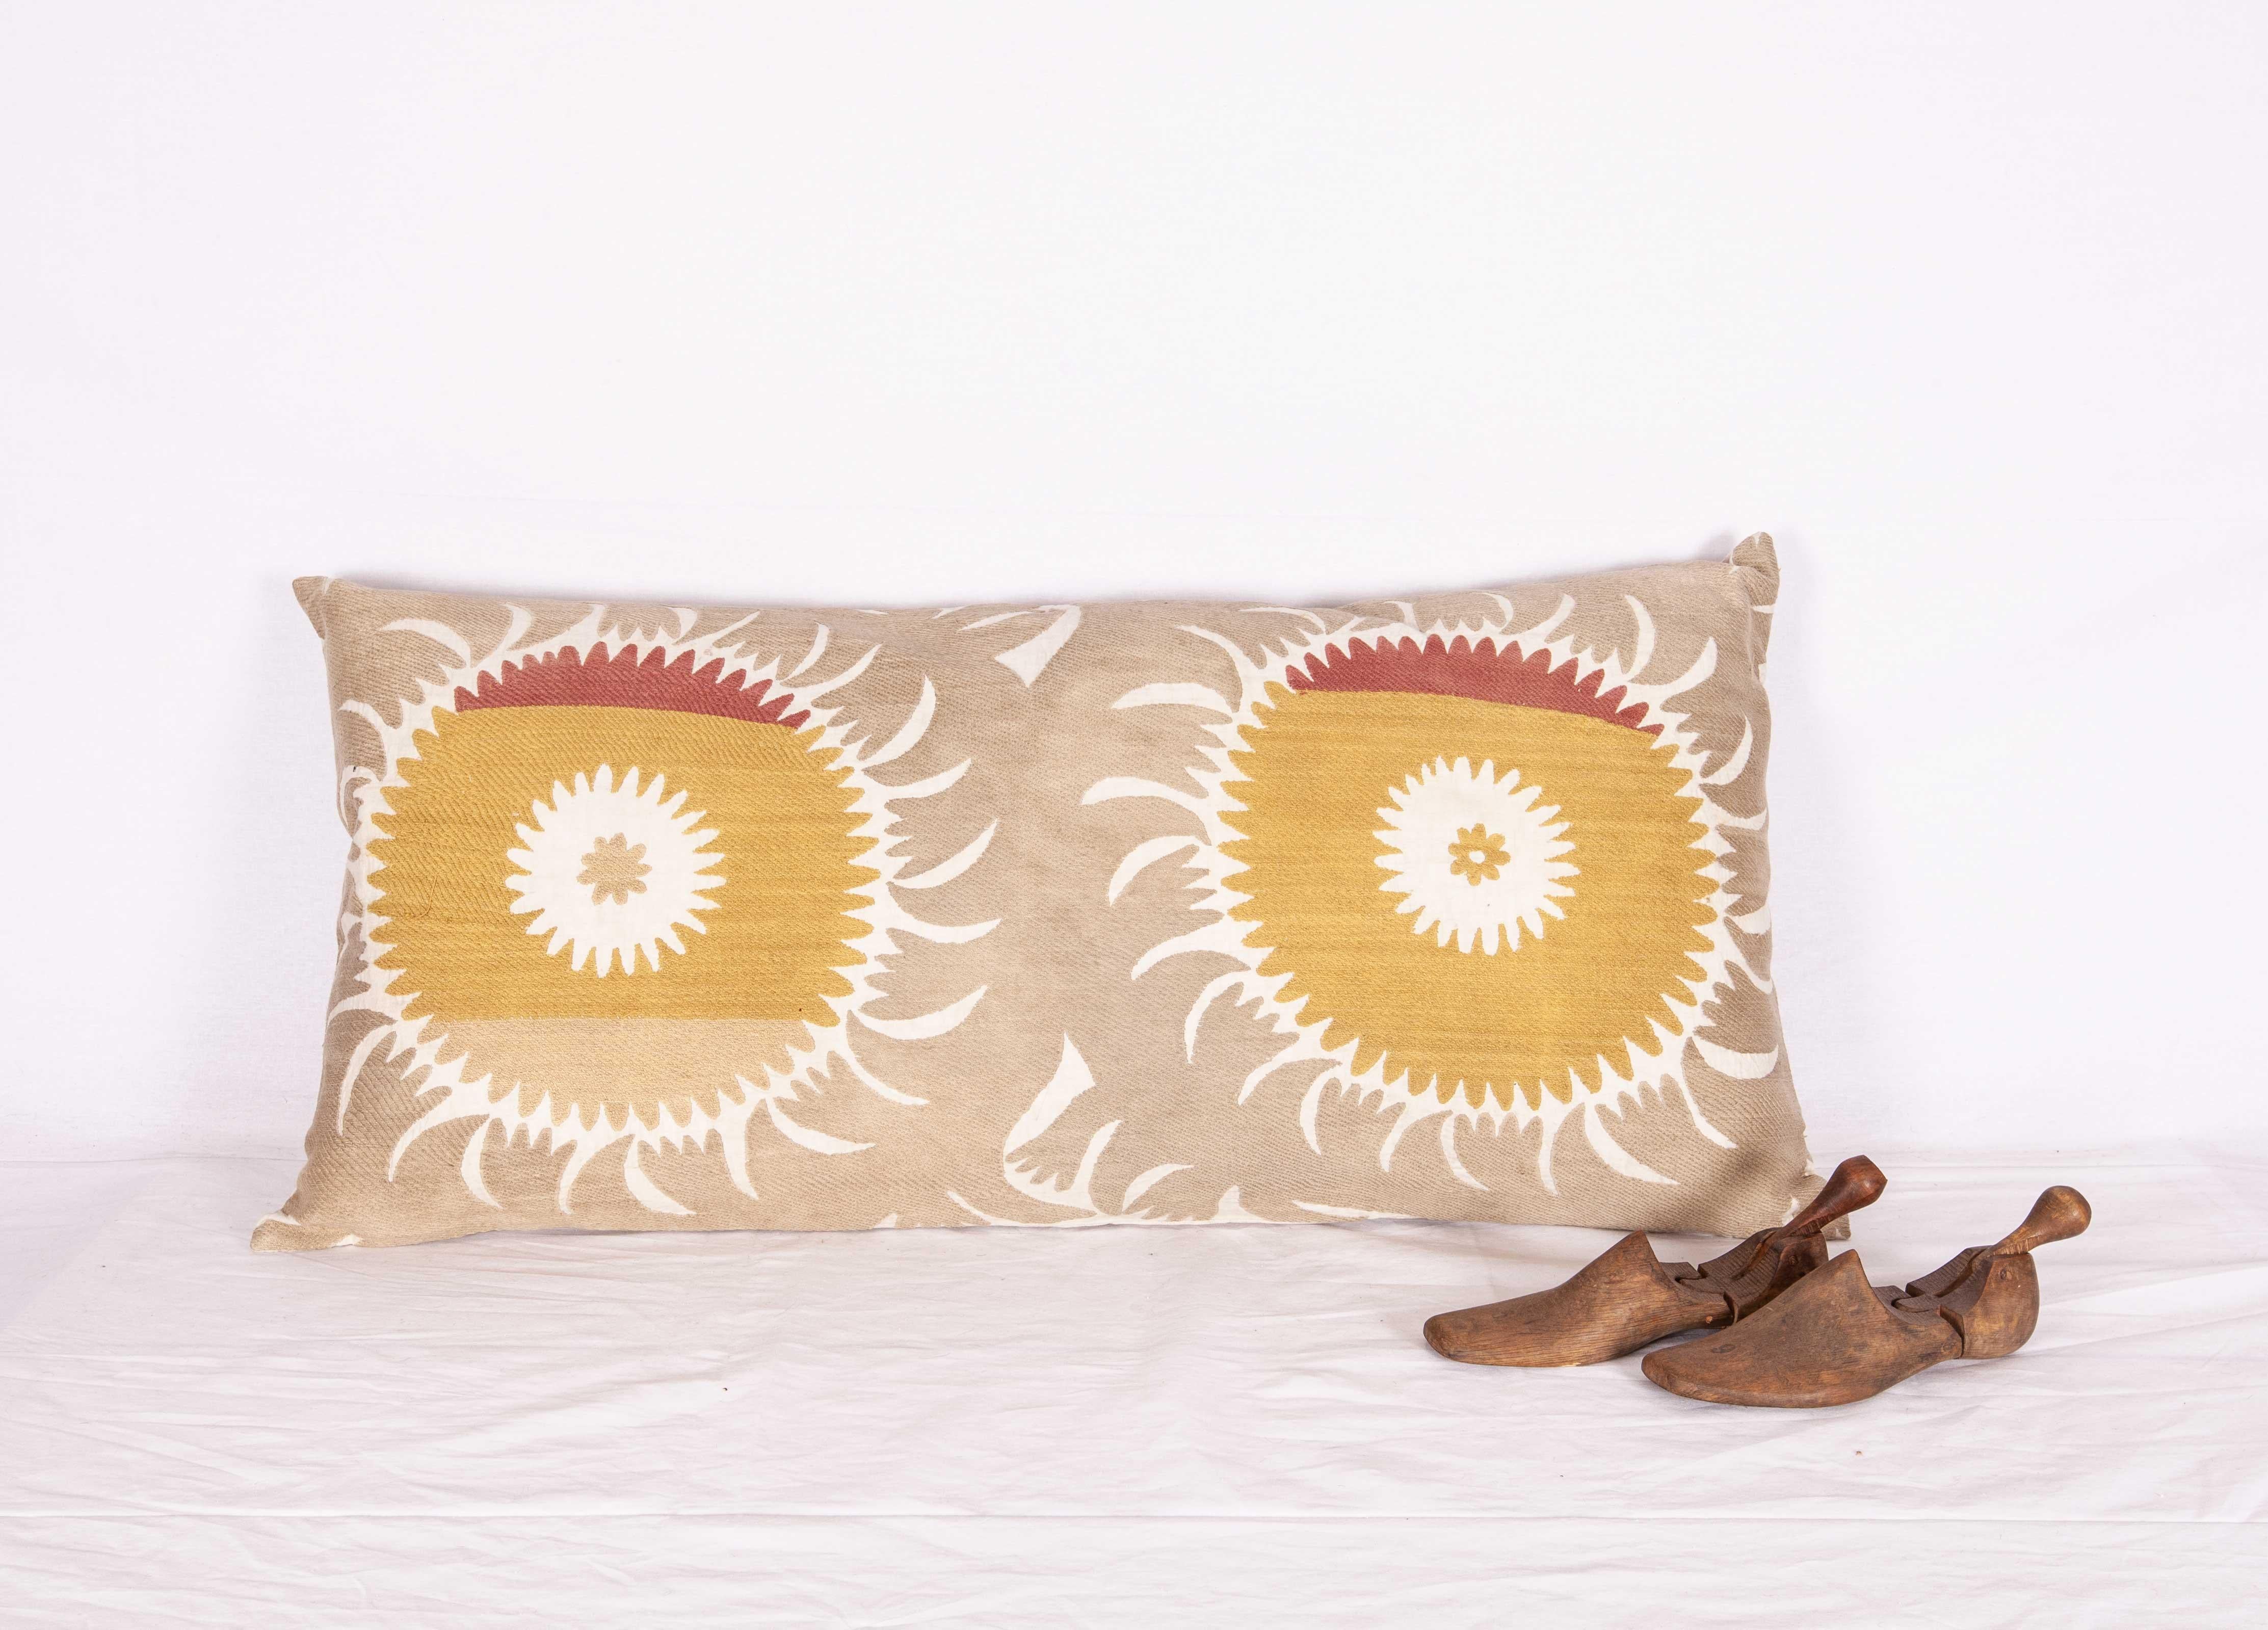 Embroidered Old Suzani Pillow/Cushion Cover Fashioned from a Mid-20th Century Suzani For Sale